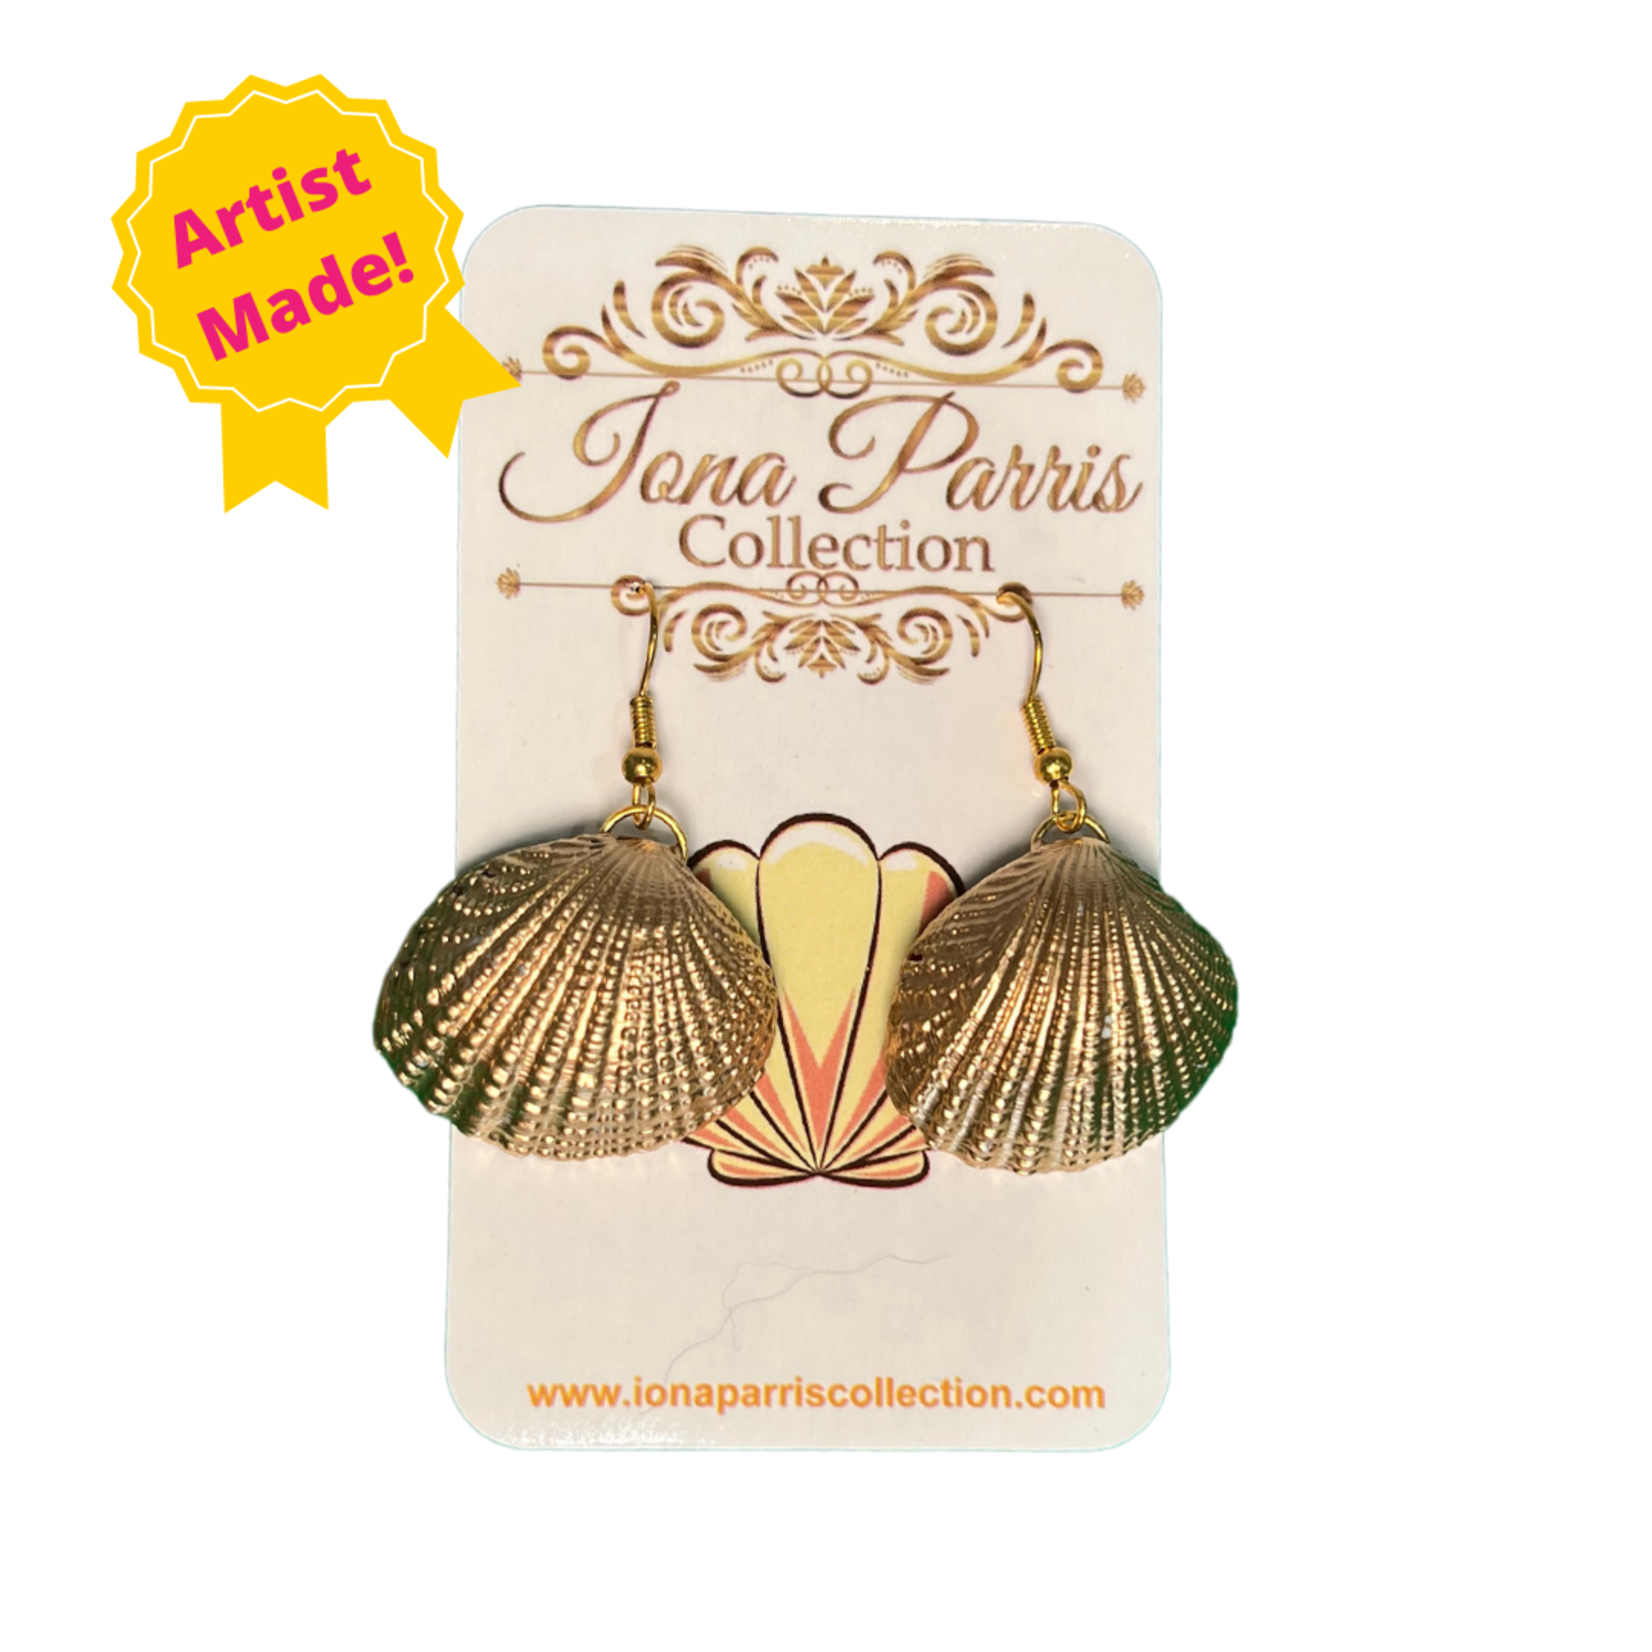 Iona Parris Iona Parris Medium Seashell Earrings (In Store ONLY!)